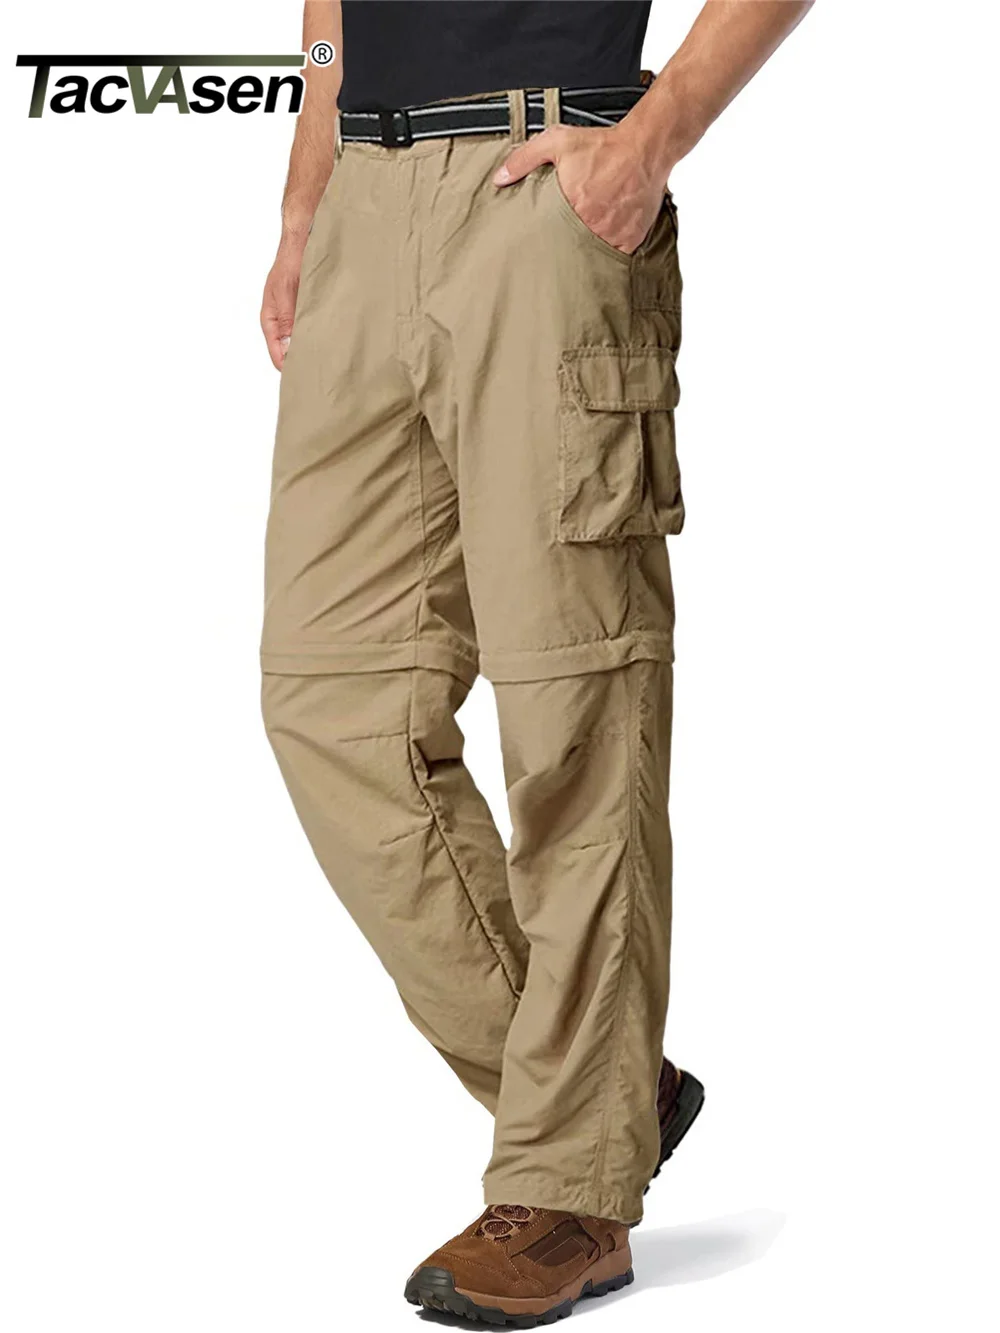 

Zip Off Hiking Pants Convertible Shorts Mens Cargo Work Pants Lightweight Breathable Trousers Workwear Outdoor Bottoms